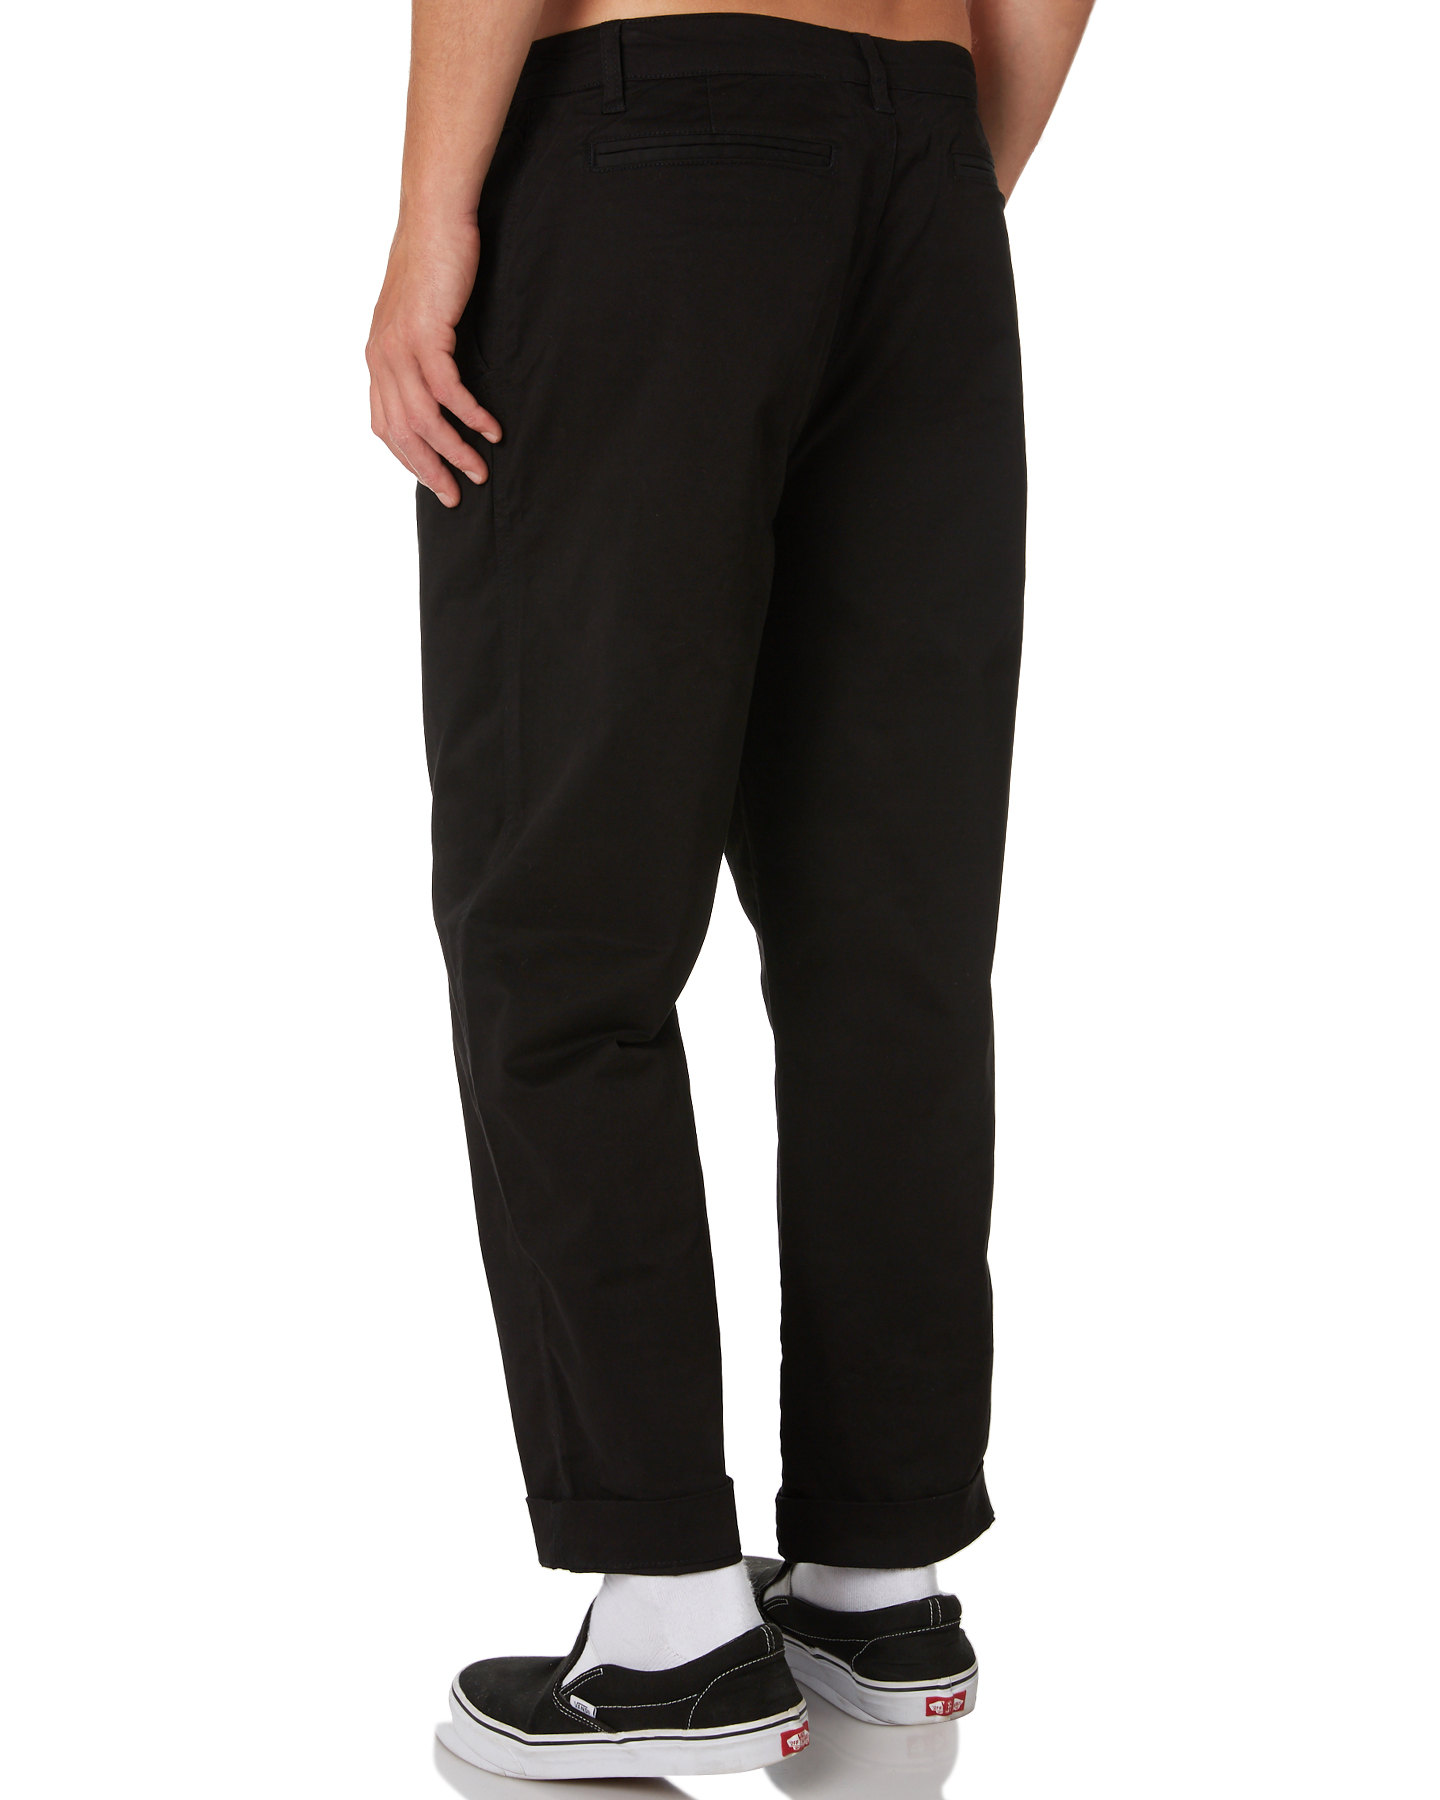 Swell Vinny Mens Loose Fit Chino Pant - Black | SurfStitch